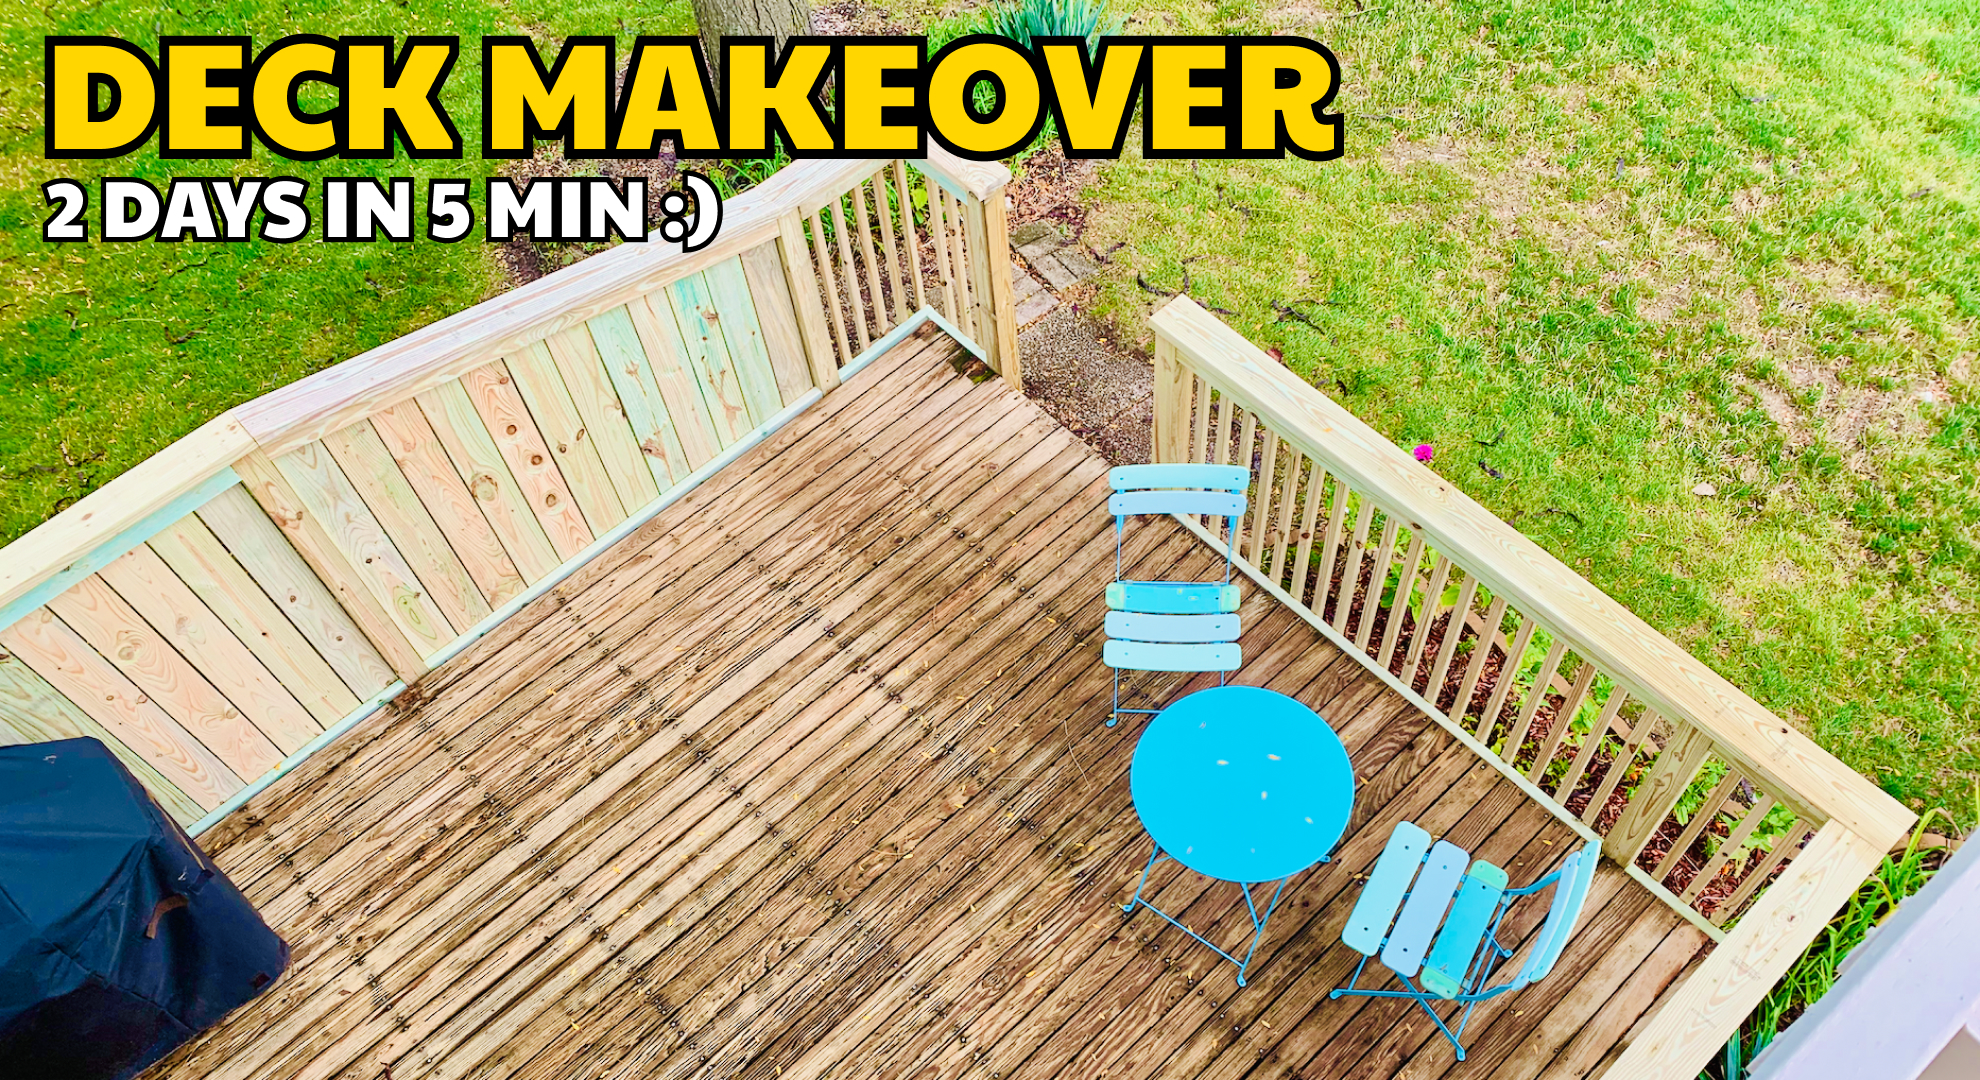 Deck makeover on a budget | 2 days in 5 minutes | DIY